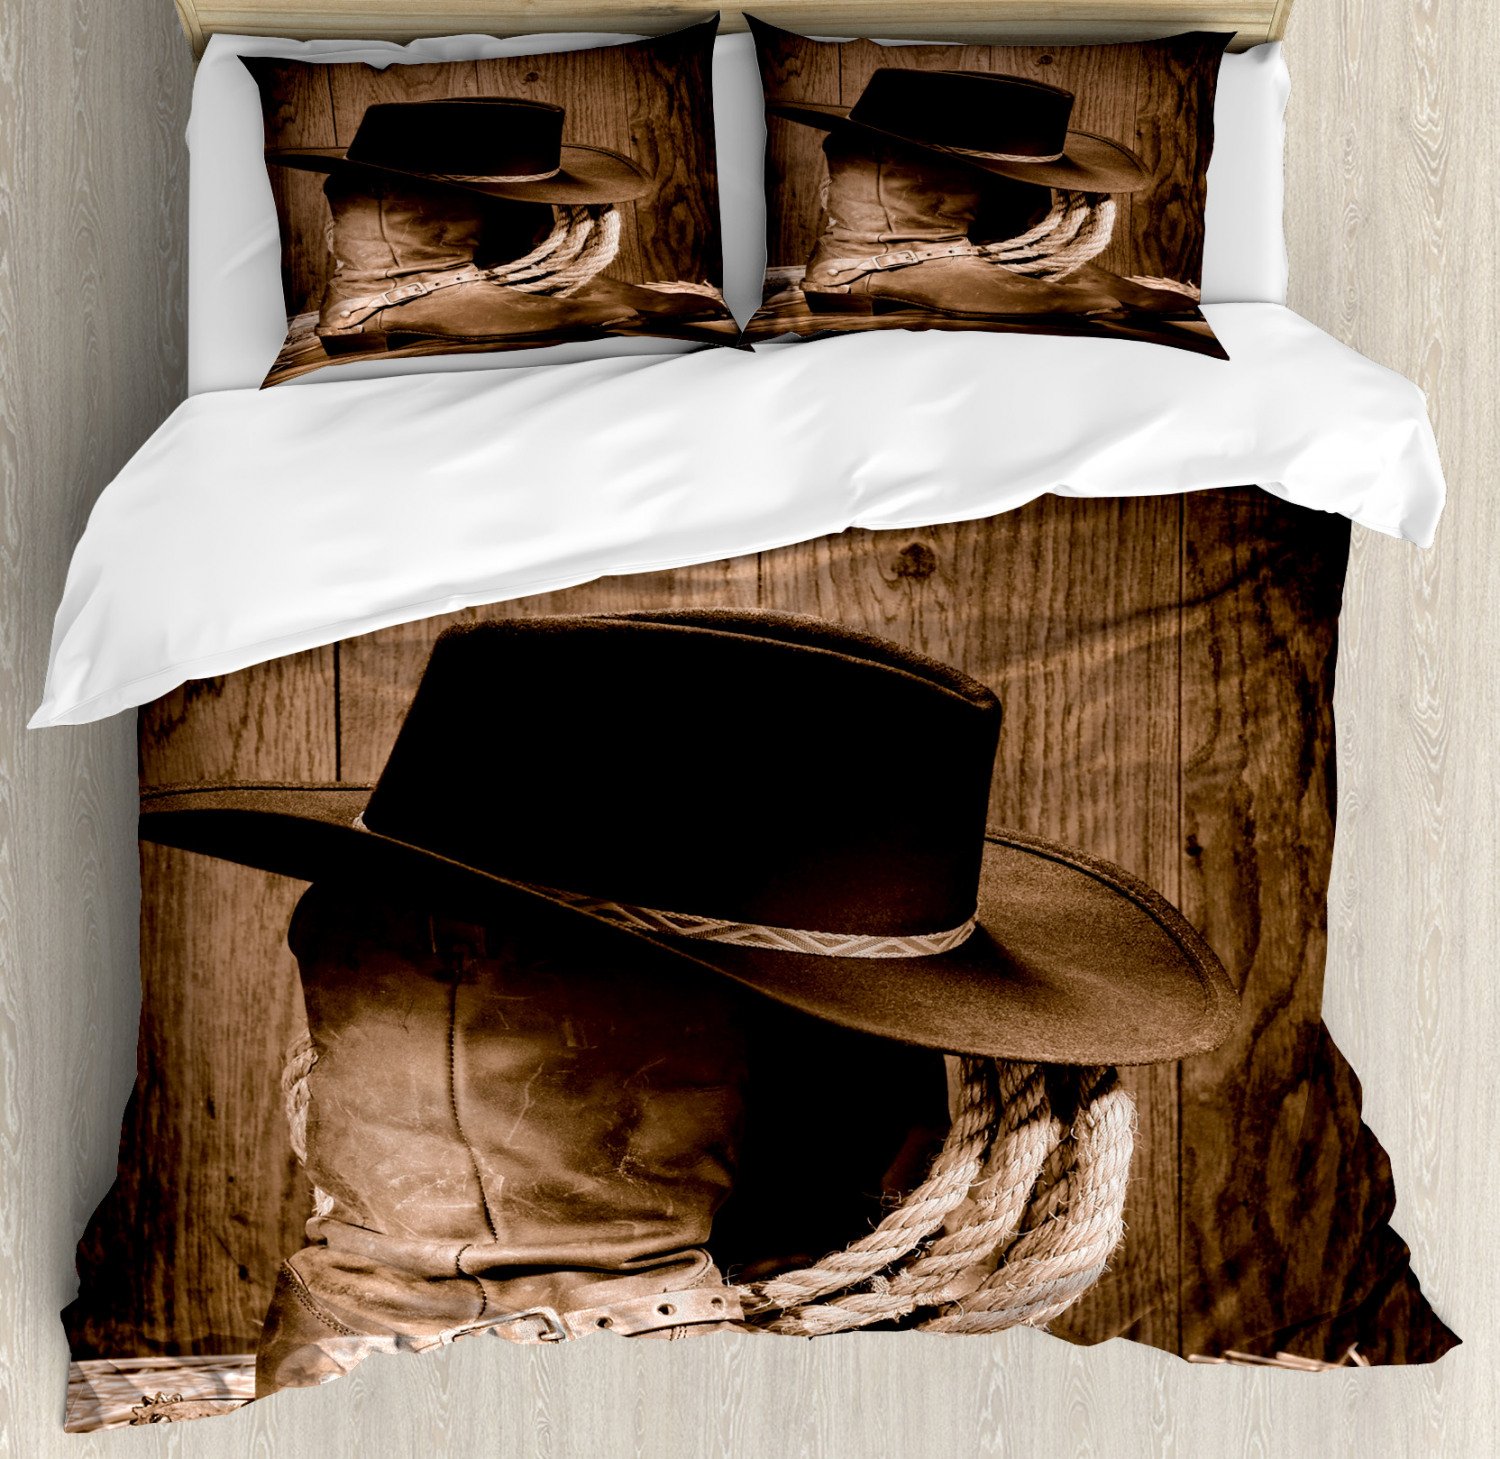 Western Duvet Cover Set With Pillow Shams Wild Cowboy Hat Wooden